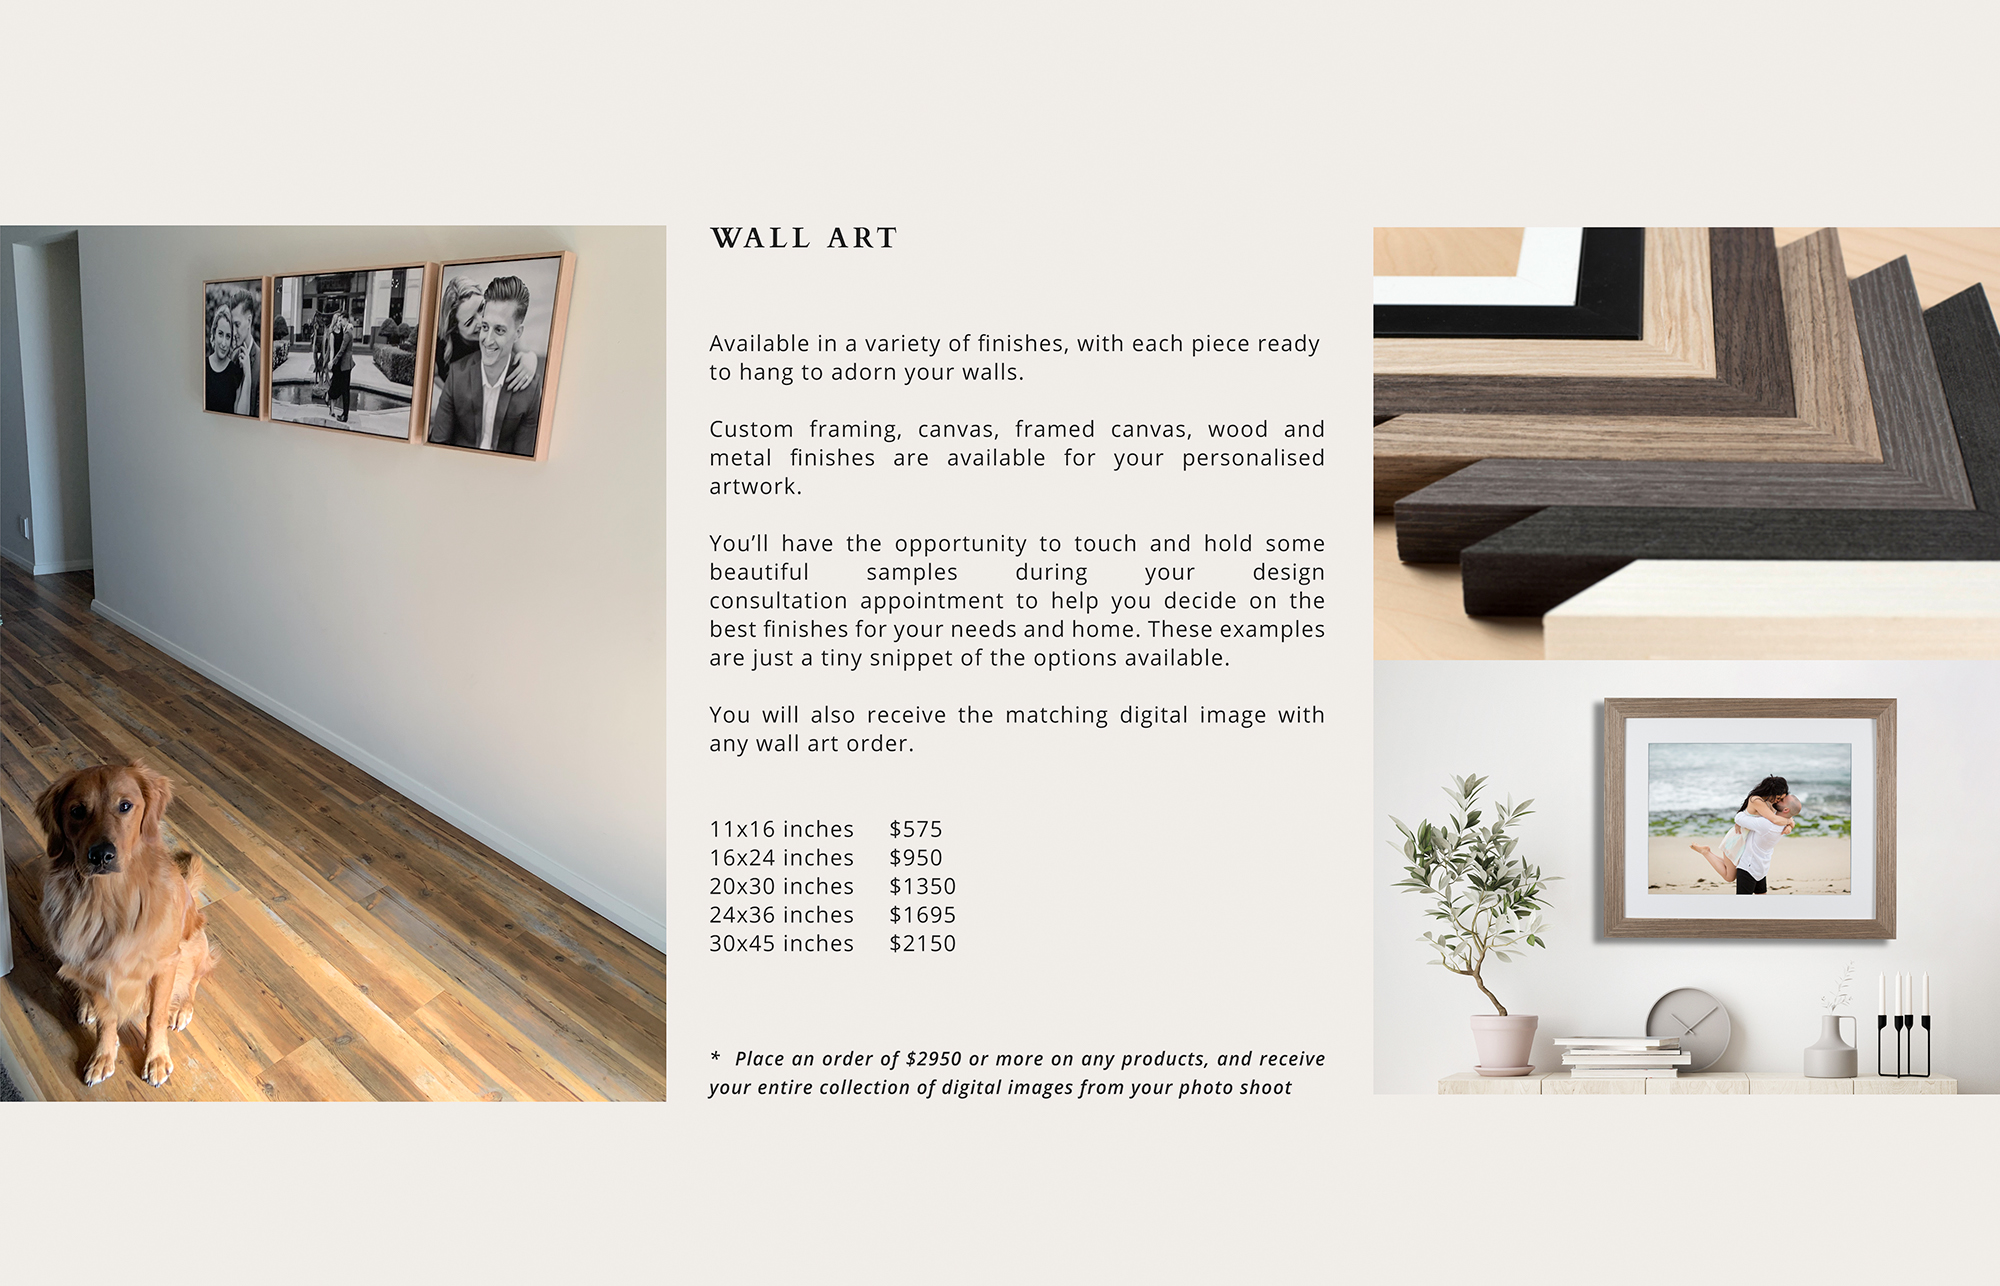 06 - WALL ART PRICING PAGE